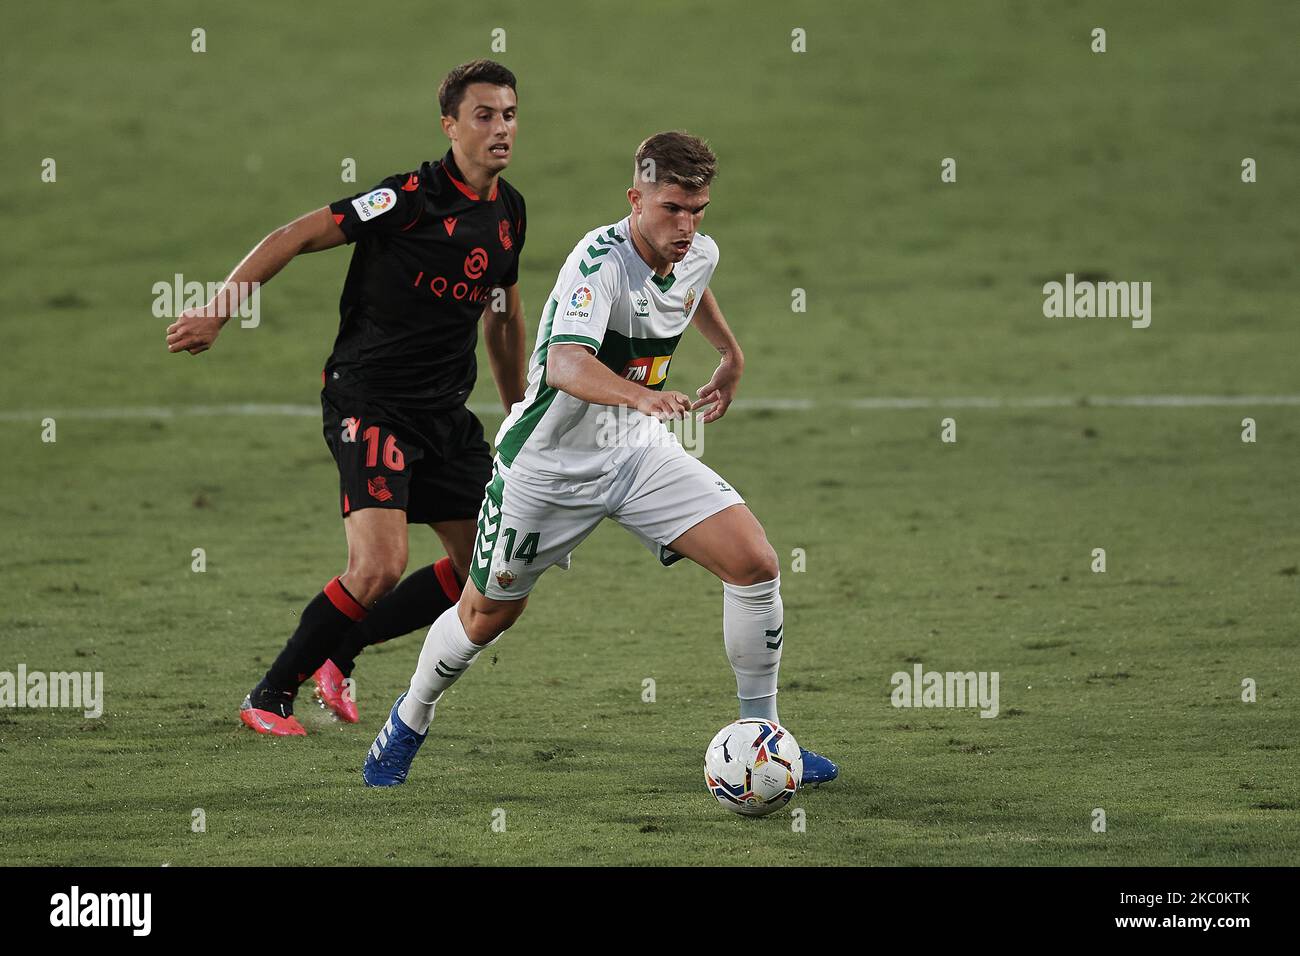 Raul Guti of Elche and Ander Guevara of Real Sociedad compete for the ball during the La Liga Santader match between Elche CF and Real Sociedad at Estadio Martinez Valero on September 27, 2020 in Elche, Spain. (Photo by Jose Breton/Pics Action/NurPhoto) Stock Photo